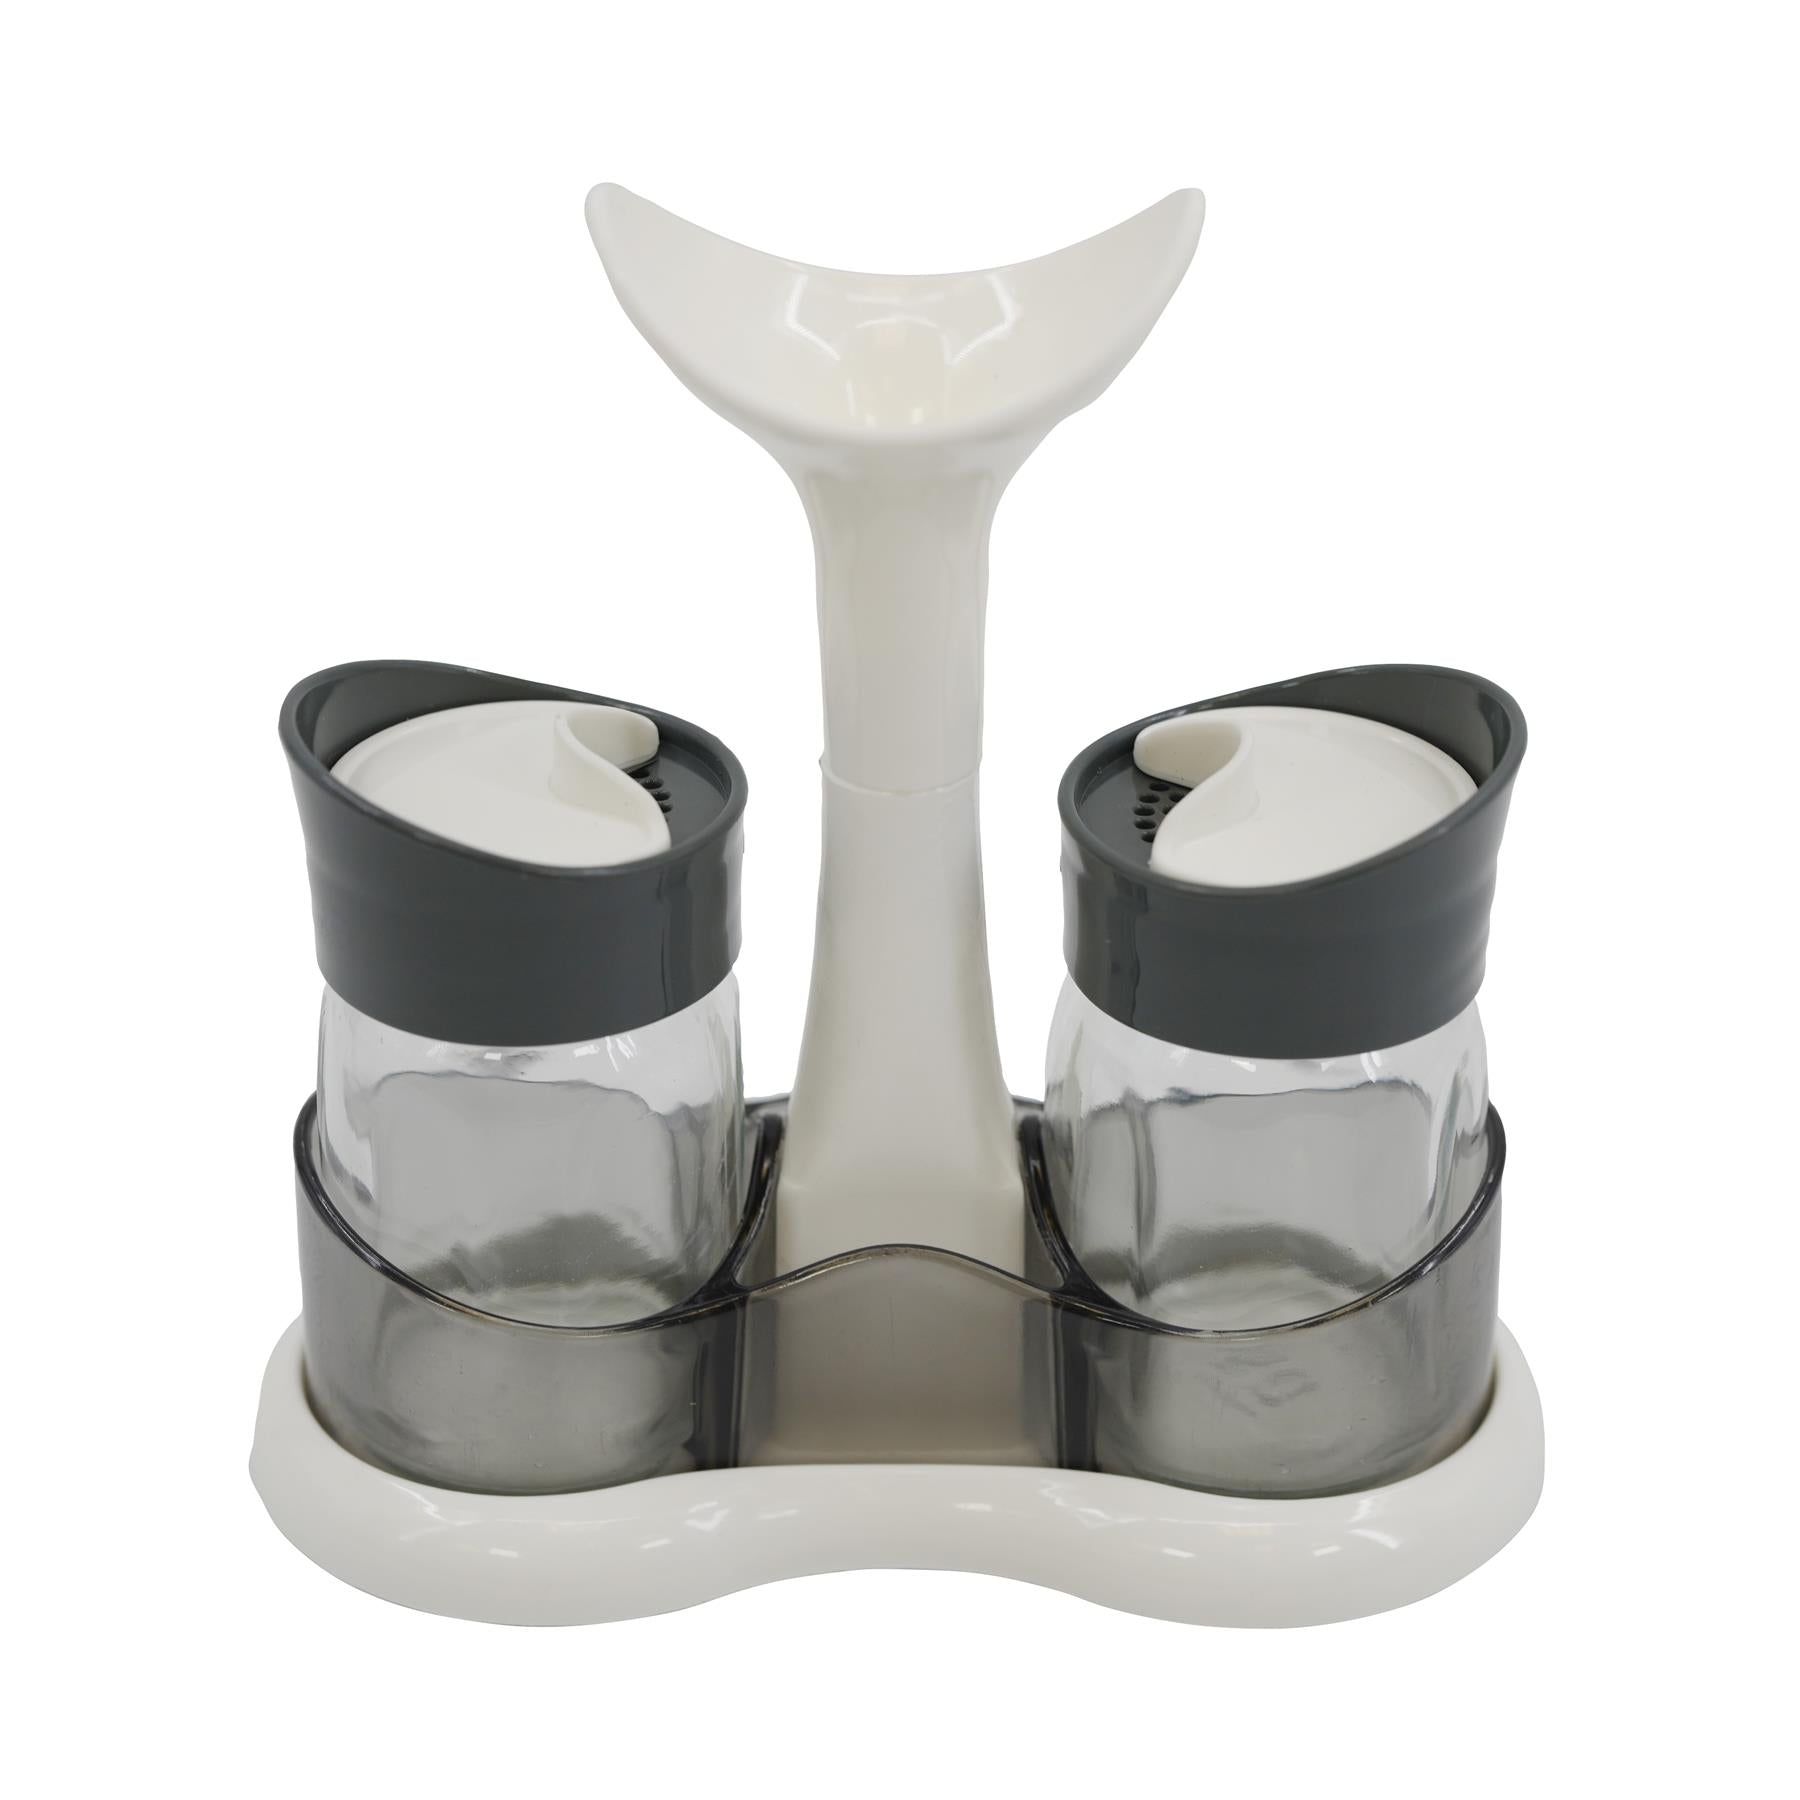 Salt and Pepper Shaker Set / Salt and Pepper Pots With Holder by Geezy - The Magic Toy Shop